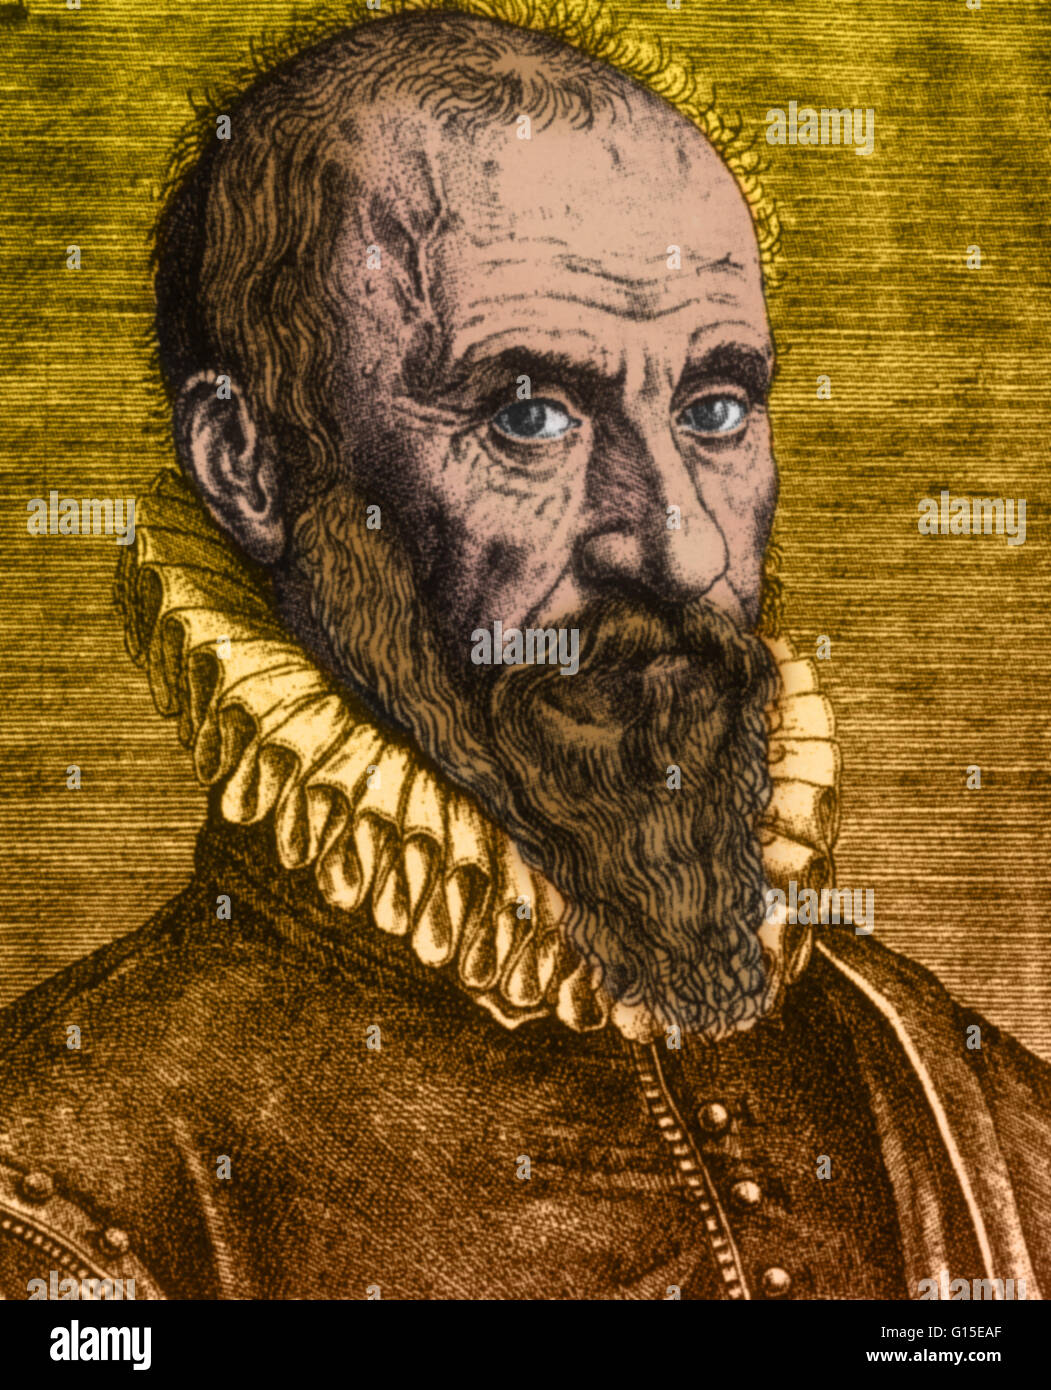 Ambroise Paré (1510-1590) was a French surgeon, anatomist and inventor. He was royal surgeon for kings Henry II, Francis II, Charles IX and Henry III and is considered one of the fathers of surgery and modern forensic pathology. He was a leader in surgica Stock Photo